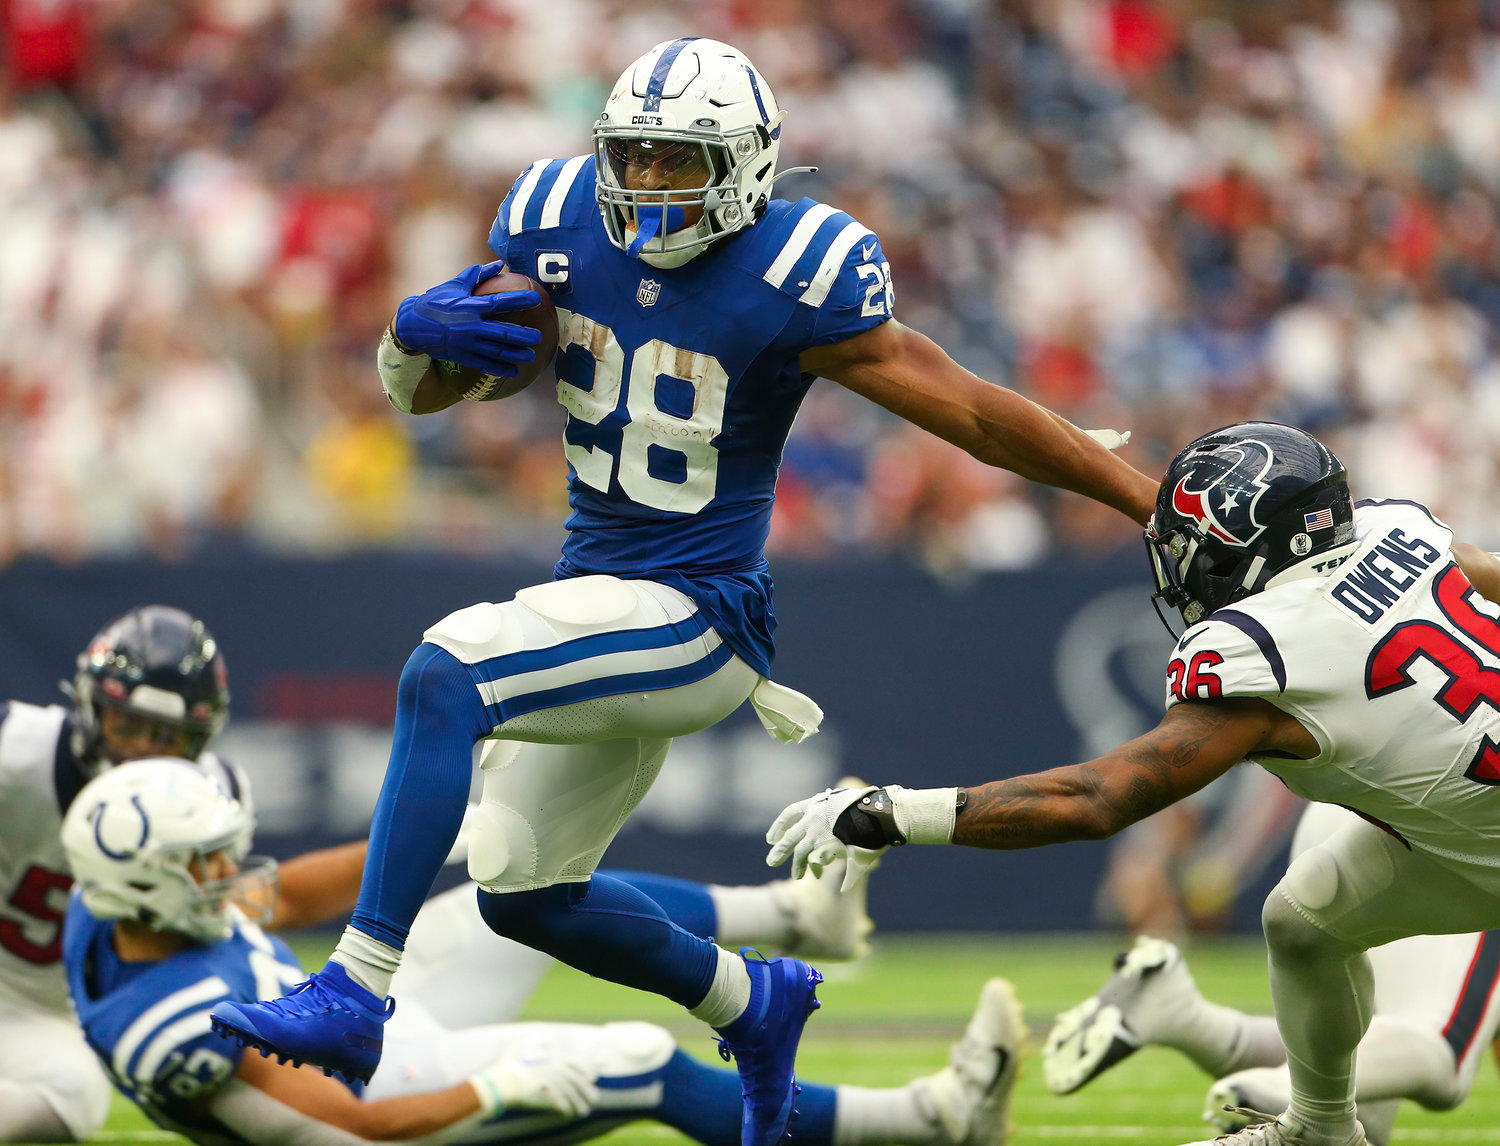 Indianapolis Colts running back Jonathan Taylor (28) attempts to evade Houston Texans safety Jonathan Owens (36) on a carry during an NFL game between the Texans and the Colts on September 11, 2022 in Houston. The game ended in a 20-20 tie after a scoreless overtime period.